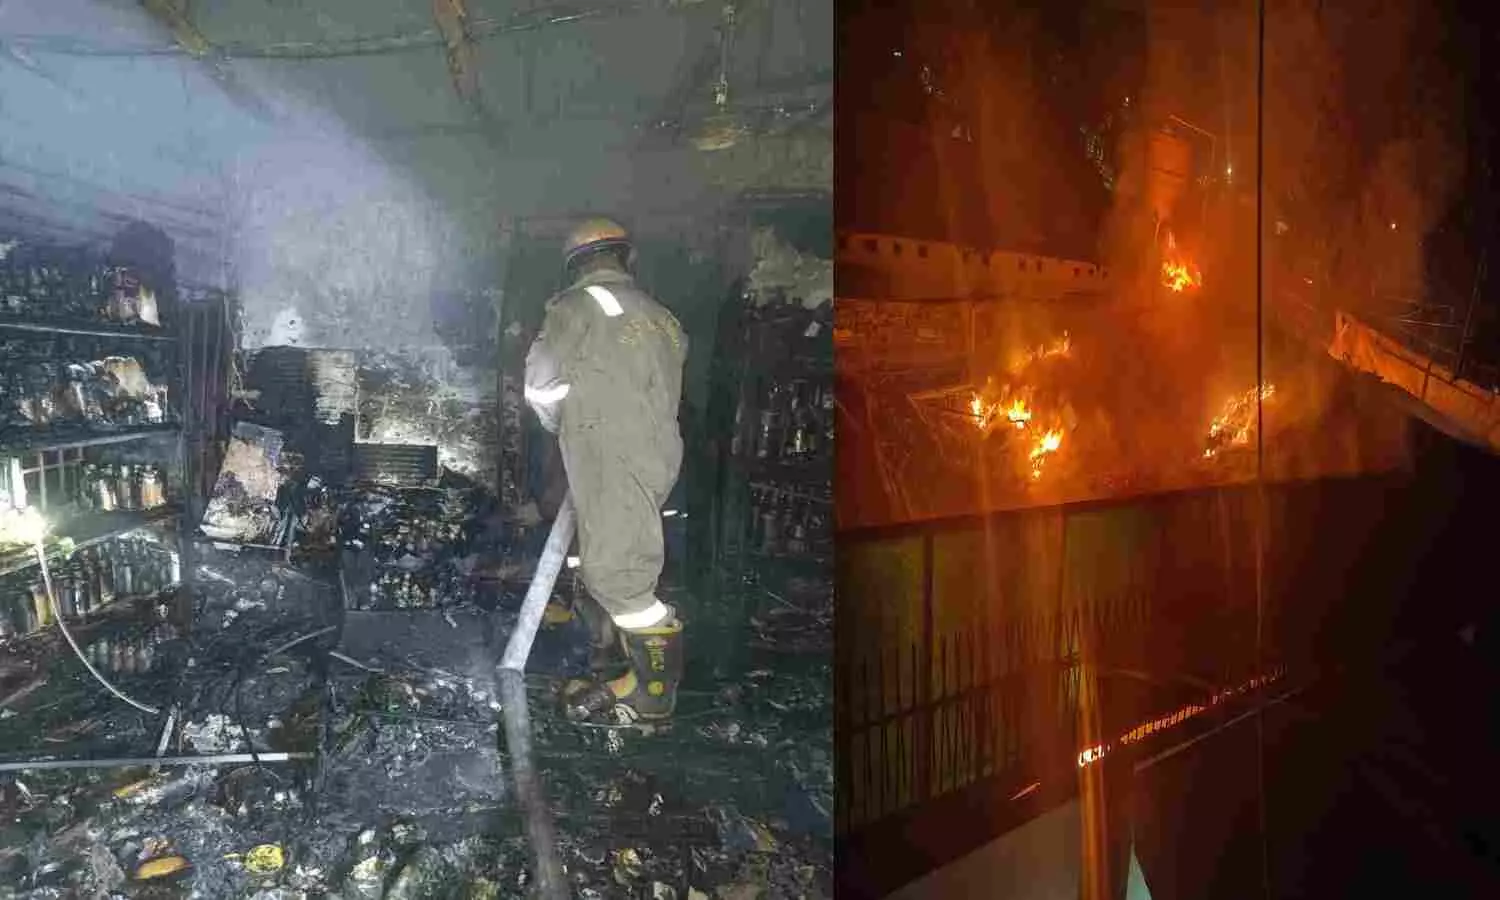 Kanpur fire broke out